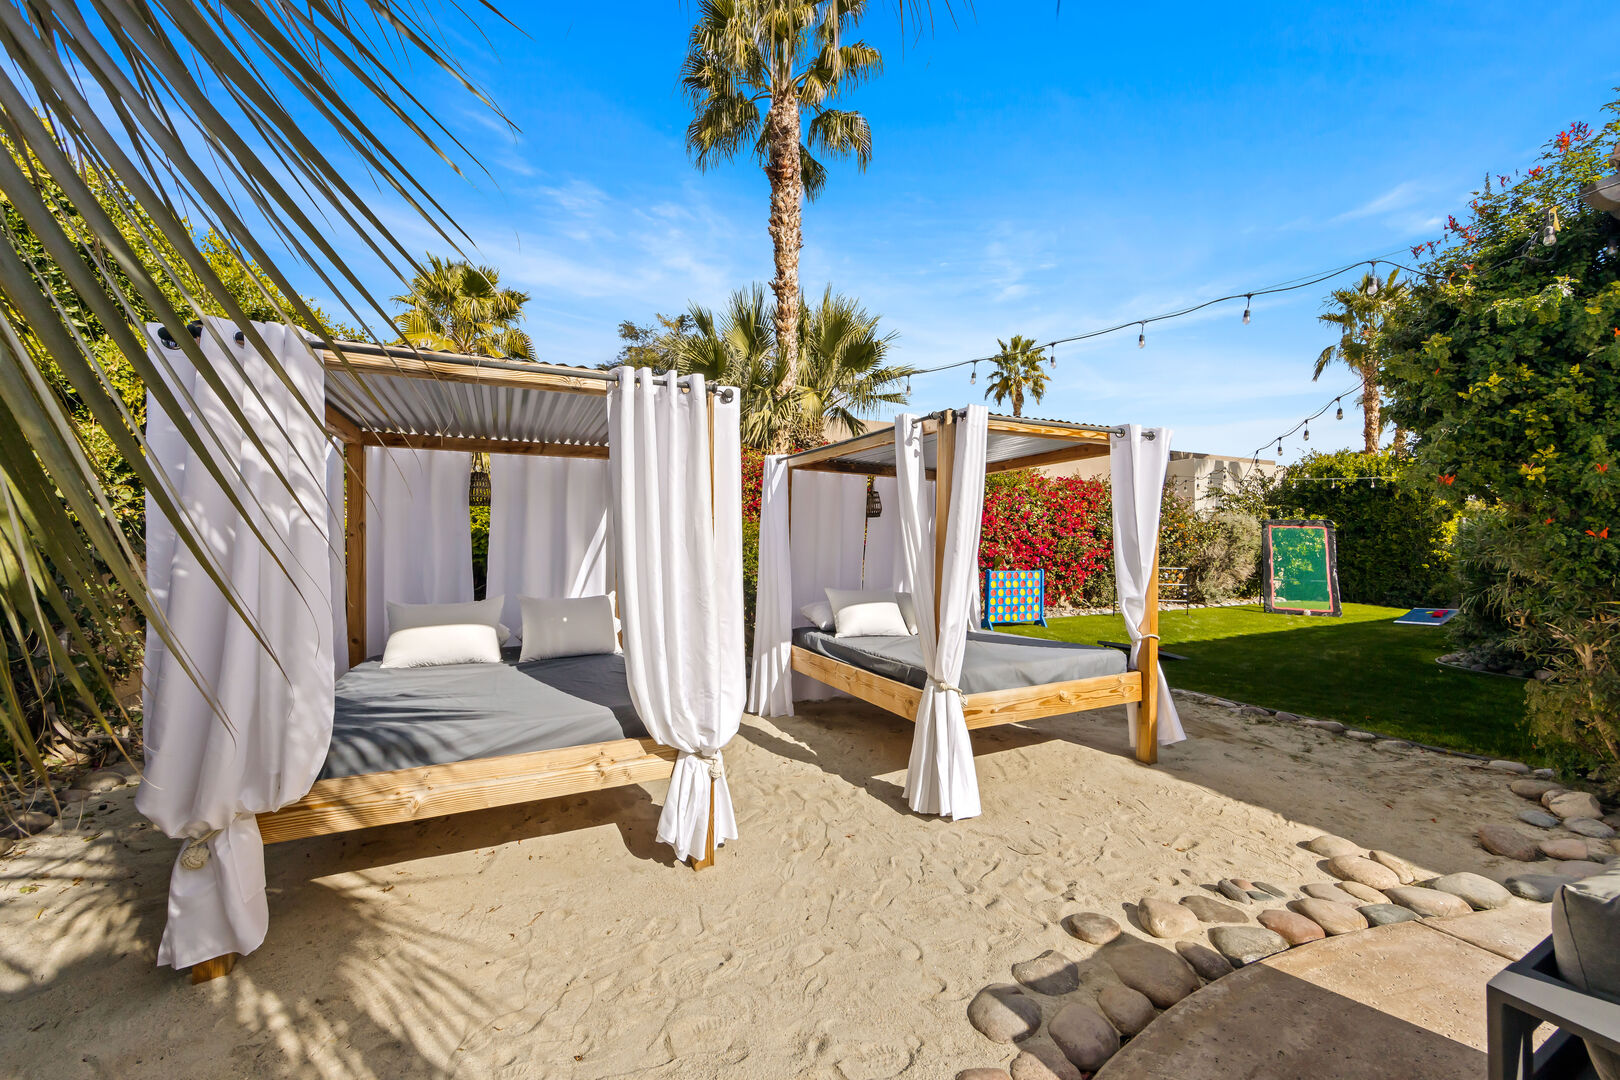 Enjoy some snacks in this Vegas-style cabana. The string lights will help set the mood.